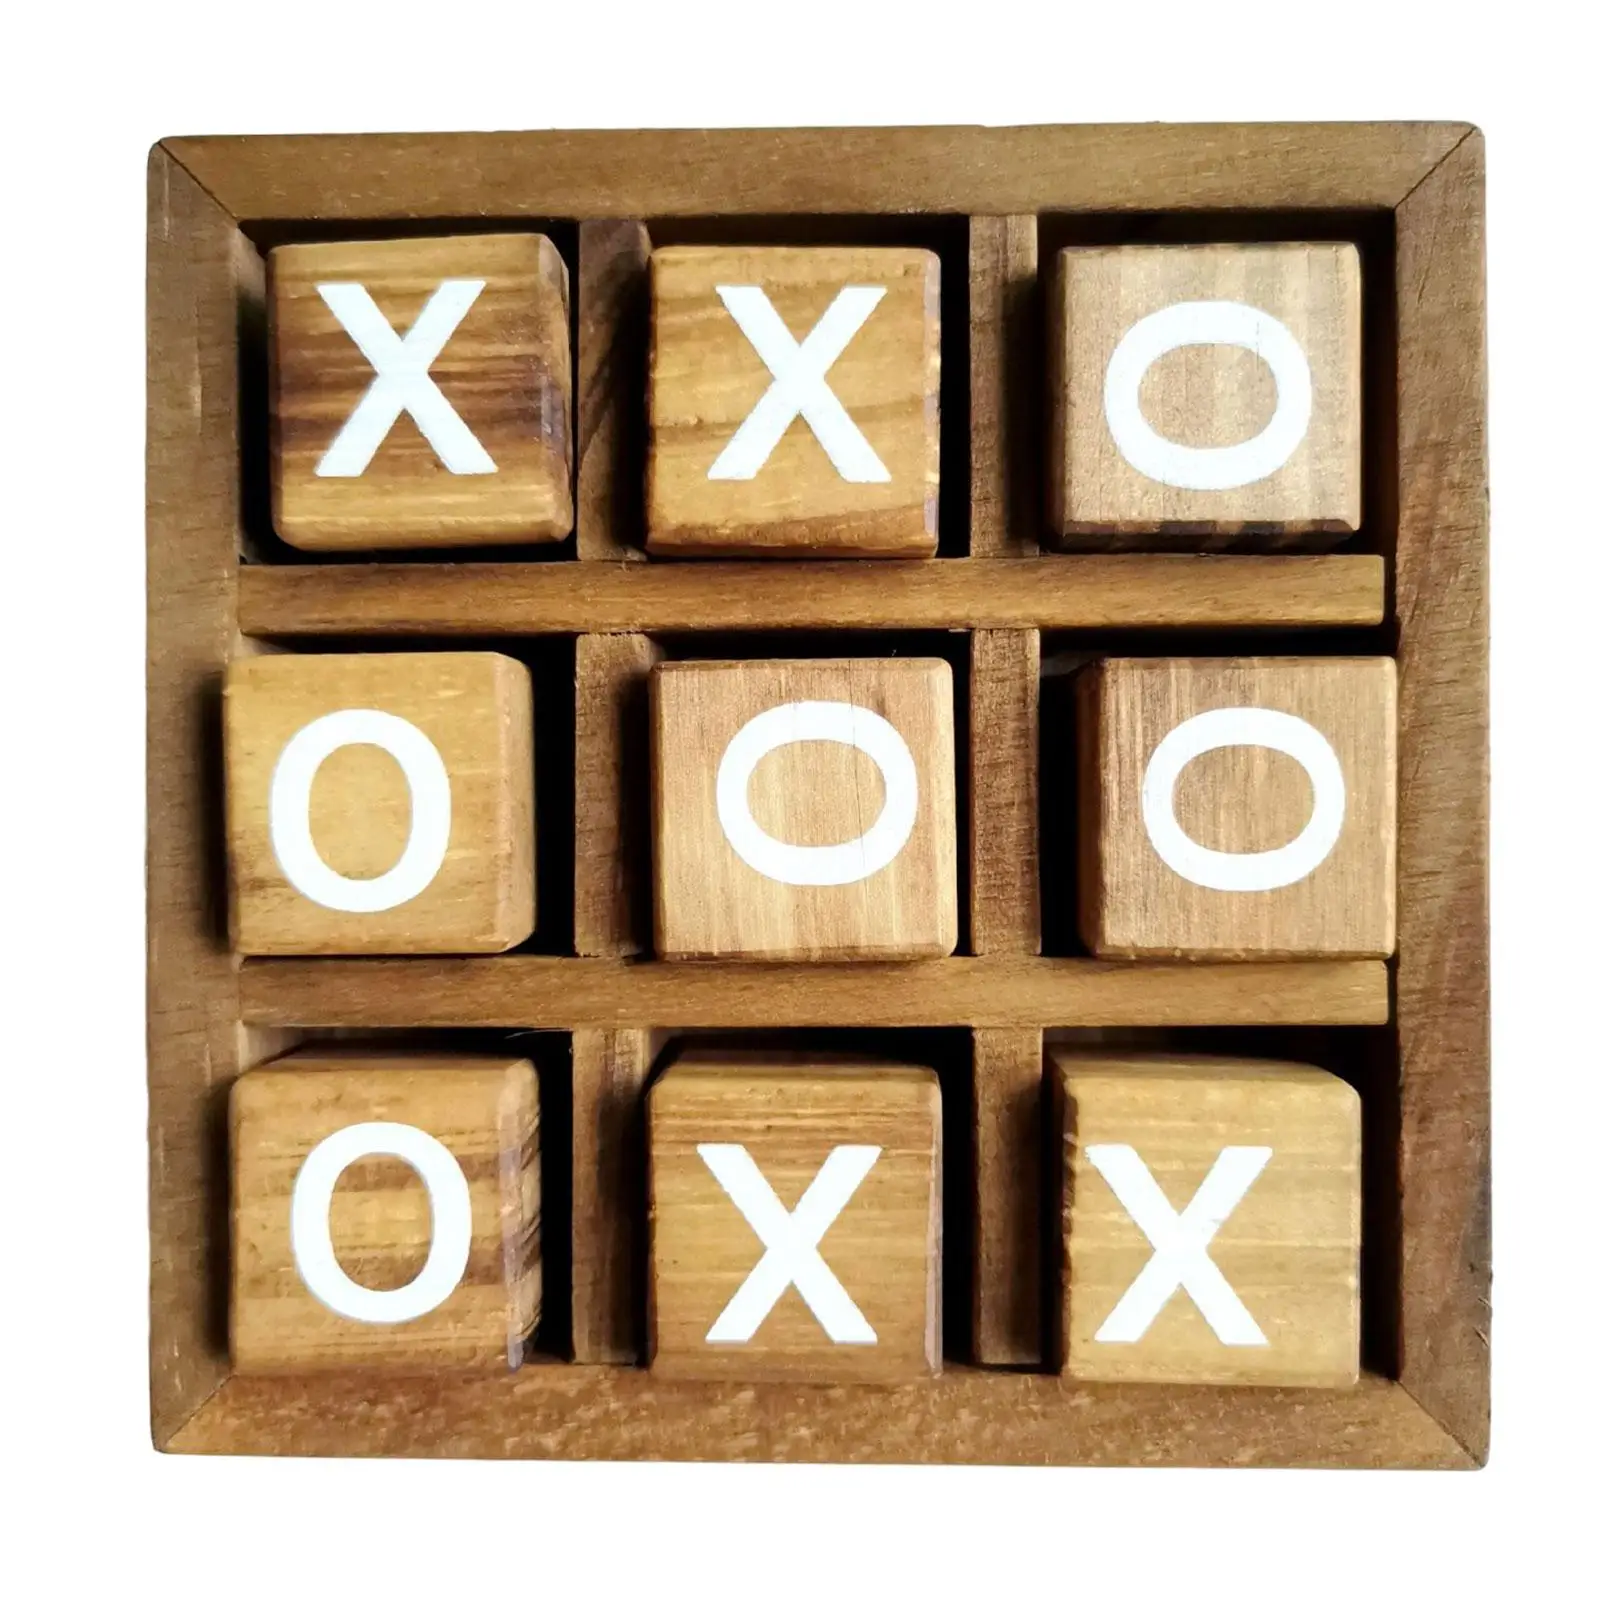 Wooden Tic TAC Toe Game Board Games Party Favor Fun Indoor Brain Teaser Travel for Friends Living Room